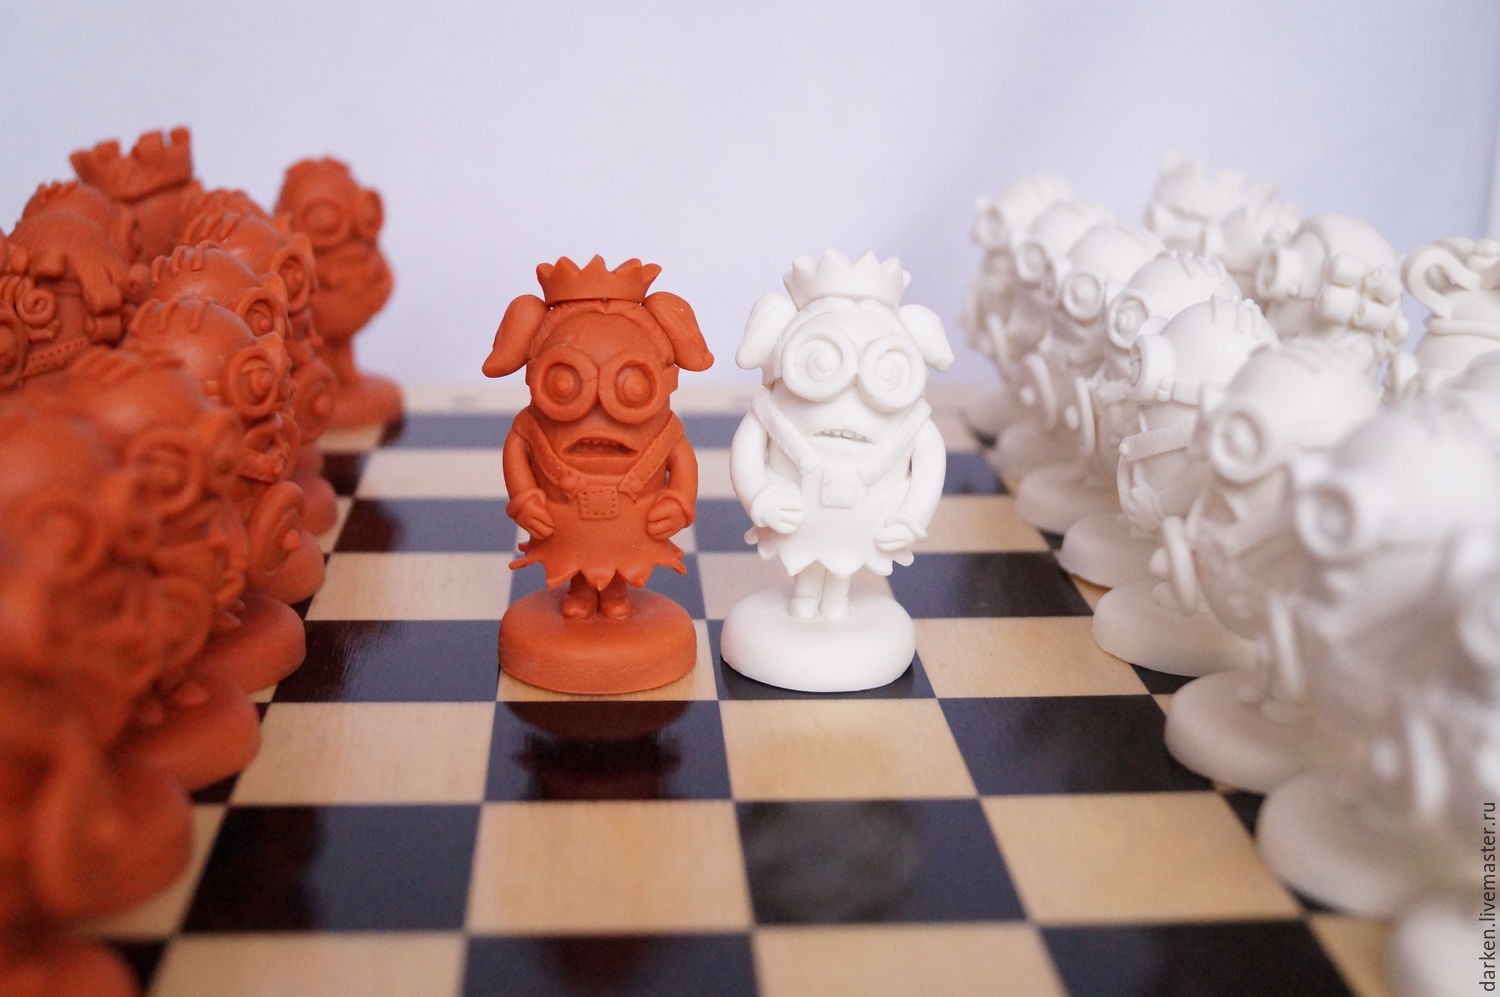 Papercraft Chess Chess Handmade Minions – Shop Online On Livemaster with Shipping